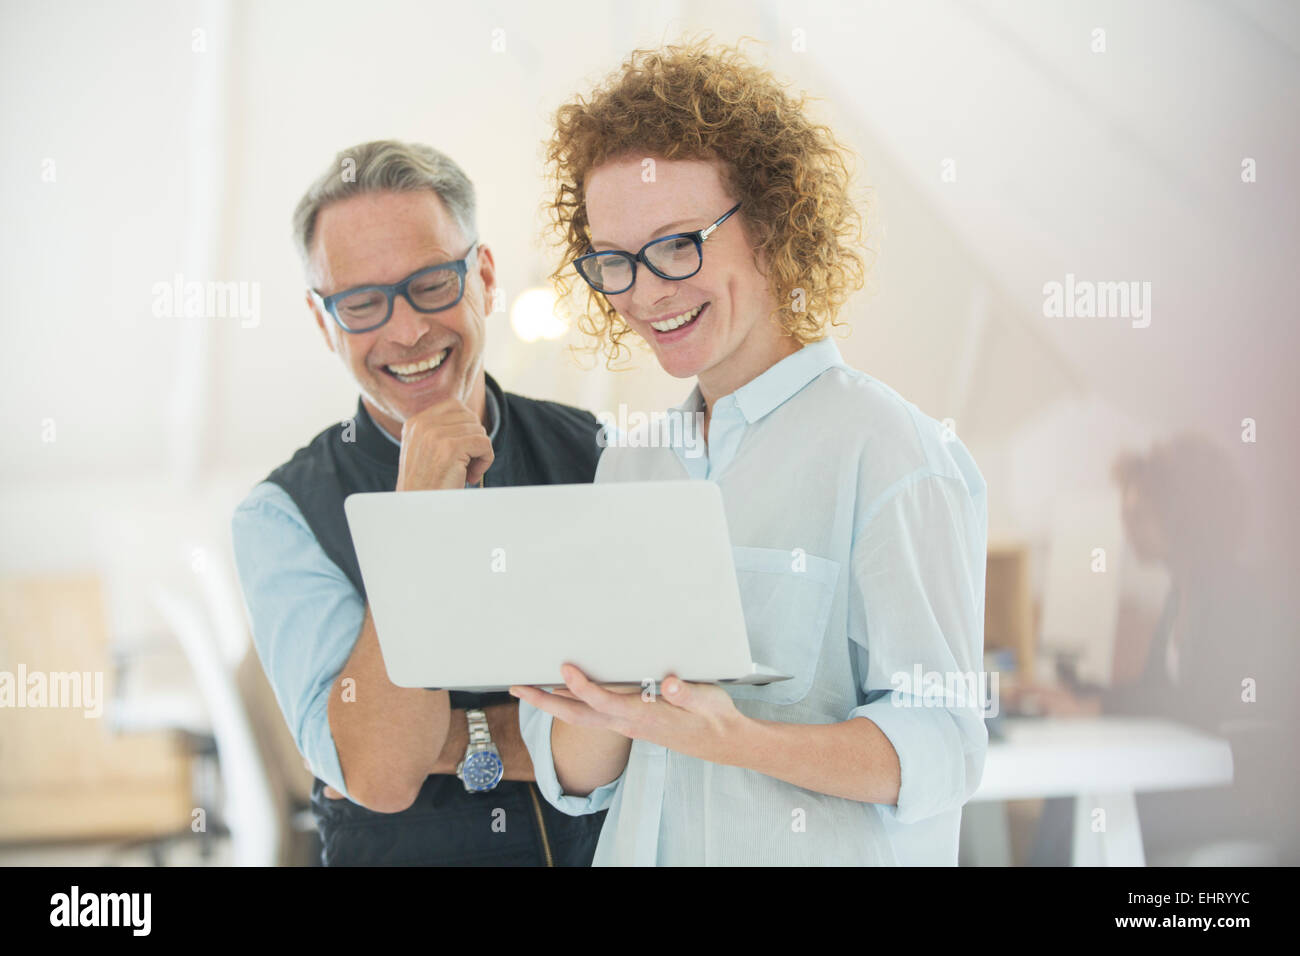 Two smiling office workers using laptop Stock Photo